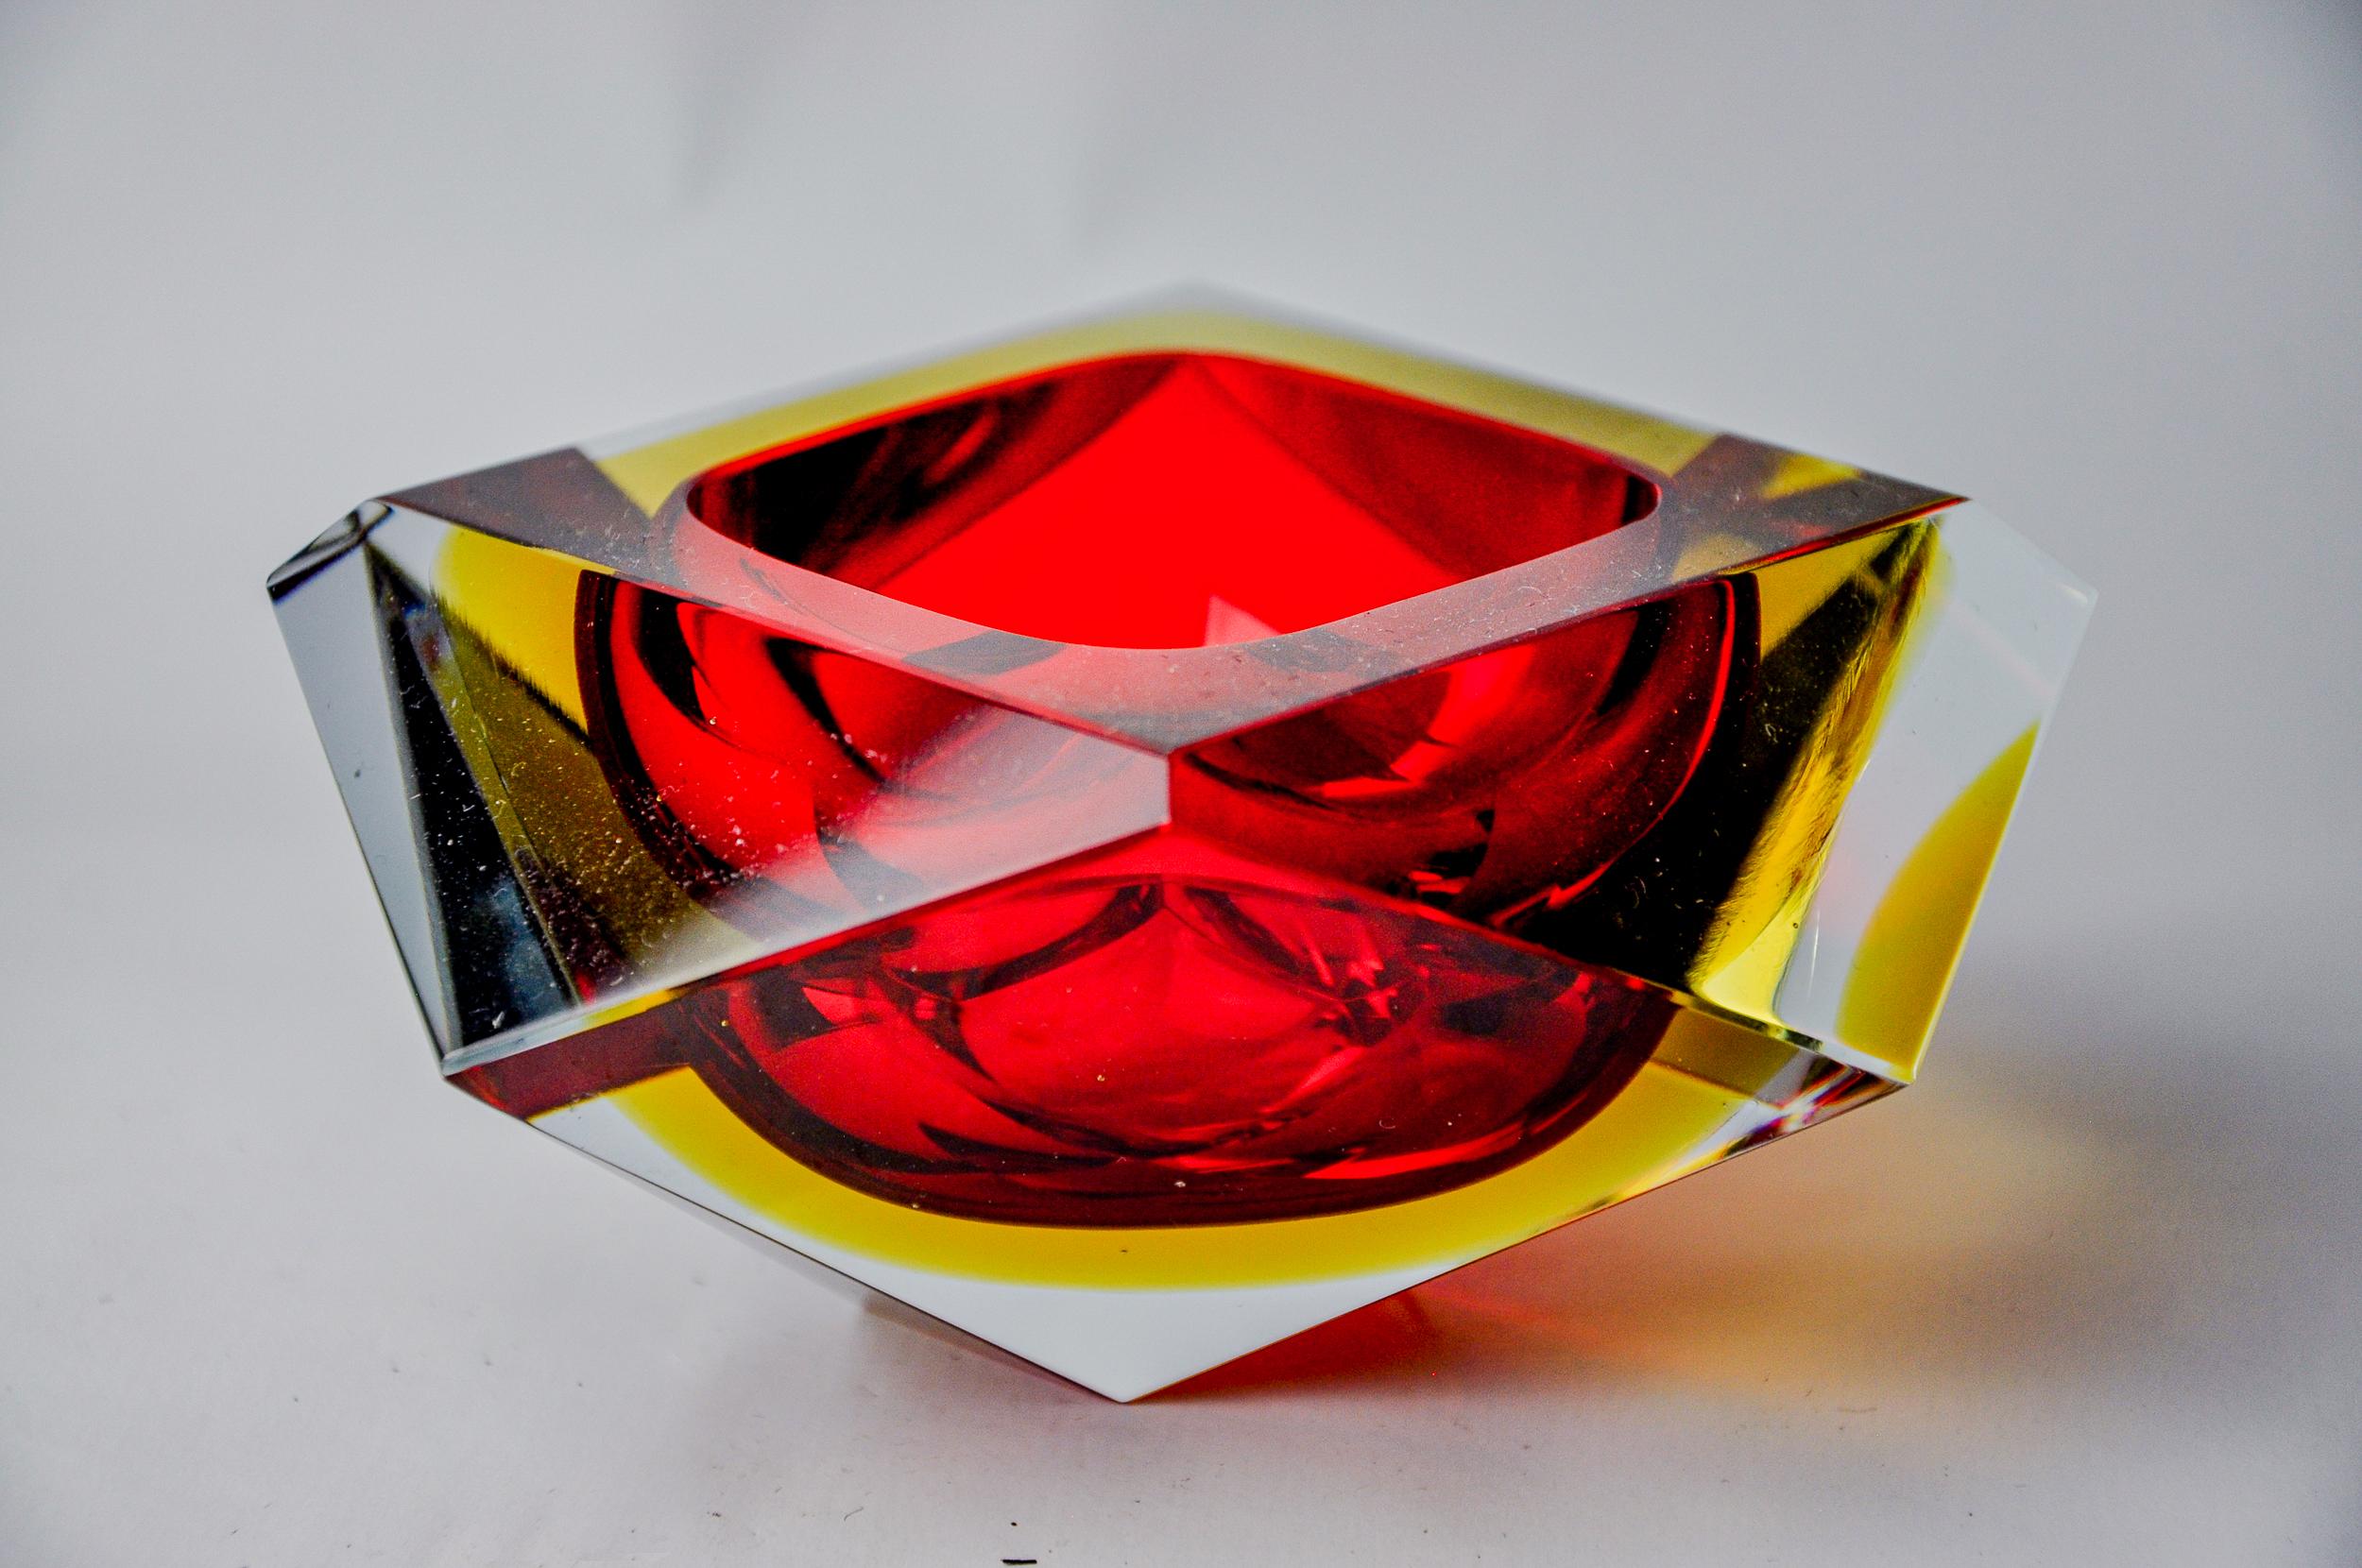 Superb and rare red and yellow faceted sommerso ashtray designated and manufactured for murano seguso in the 1970s. Artisanal work of faceted glass according to the 